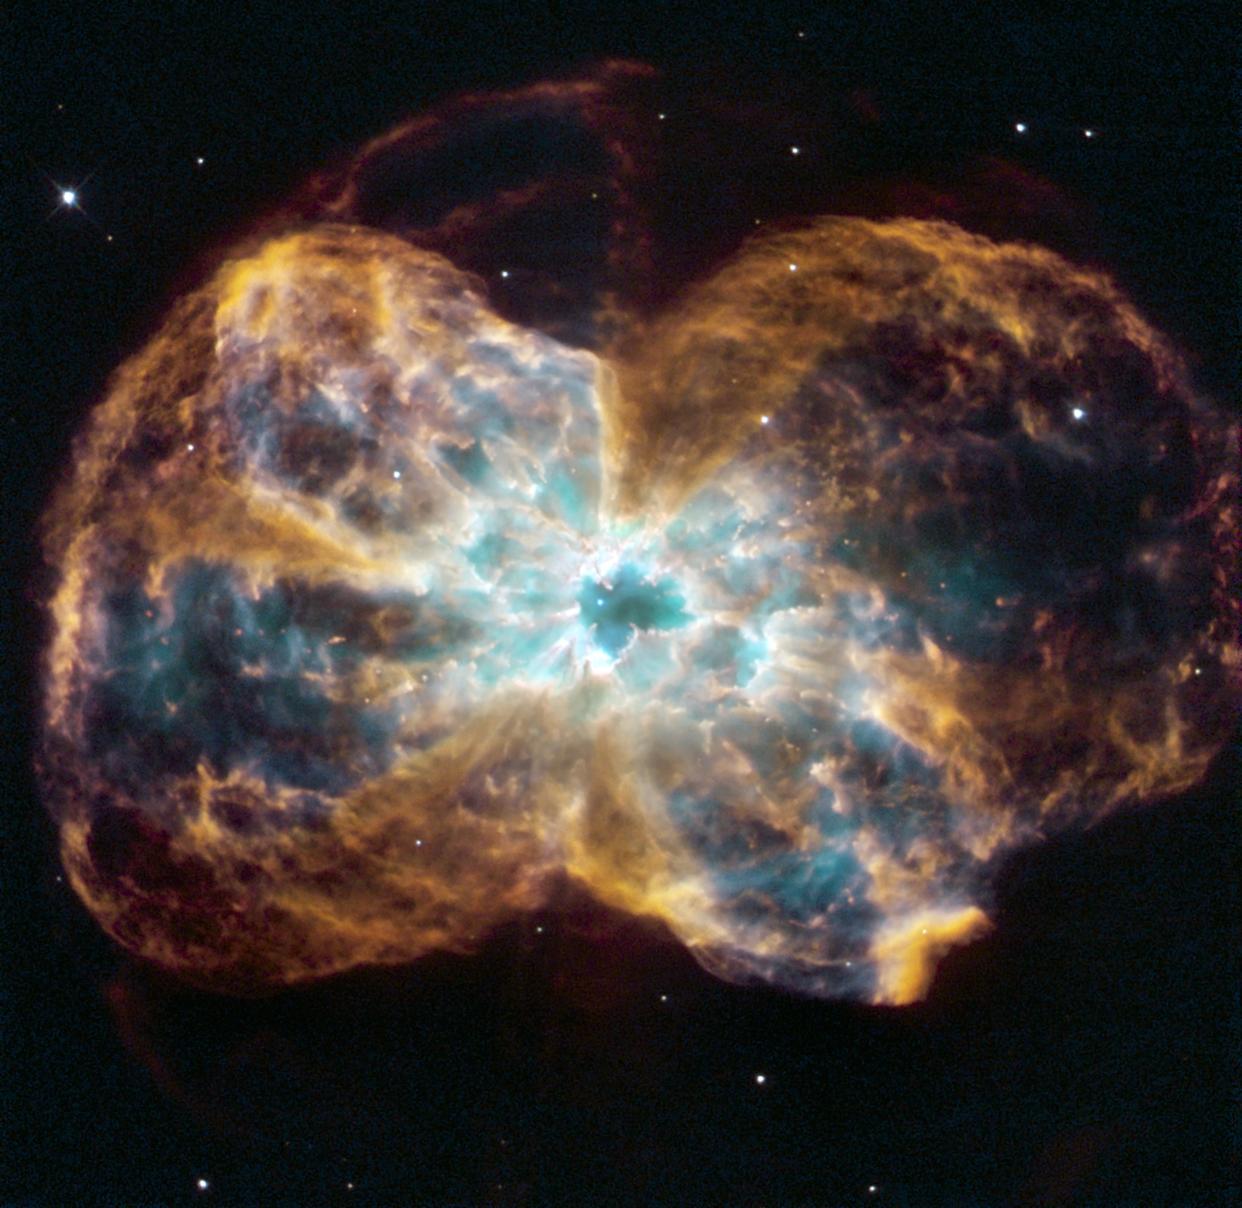 The star is ending its life by casting off its outer layers of gas, which formed a cocoon around the star's remaining core. Ultraviolet light from the dying star makes the material glow. The burned-out star, called a white dwarf, is the white dot in the center. Hubble Space Telescope (HST). (Photo by: Universal History Archive/Universal Images Group via Getty Images)